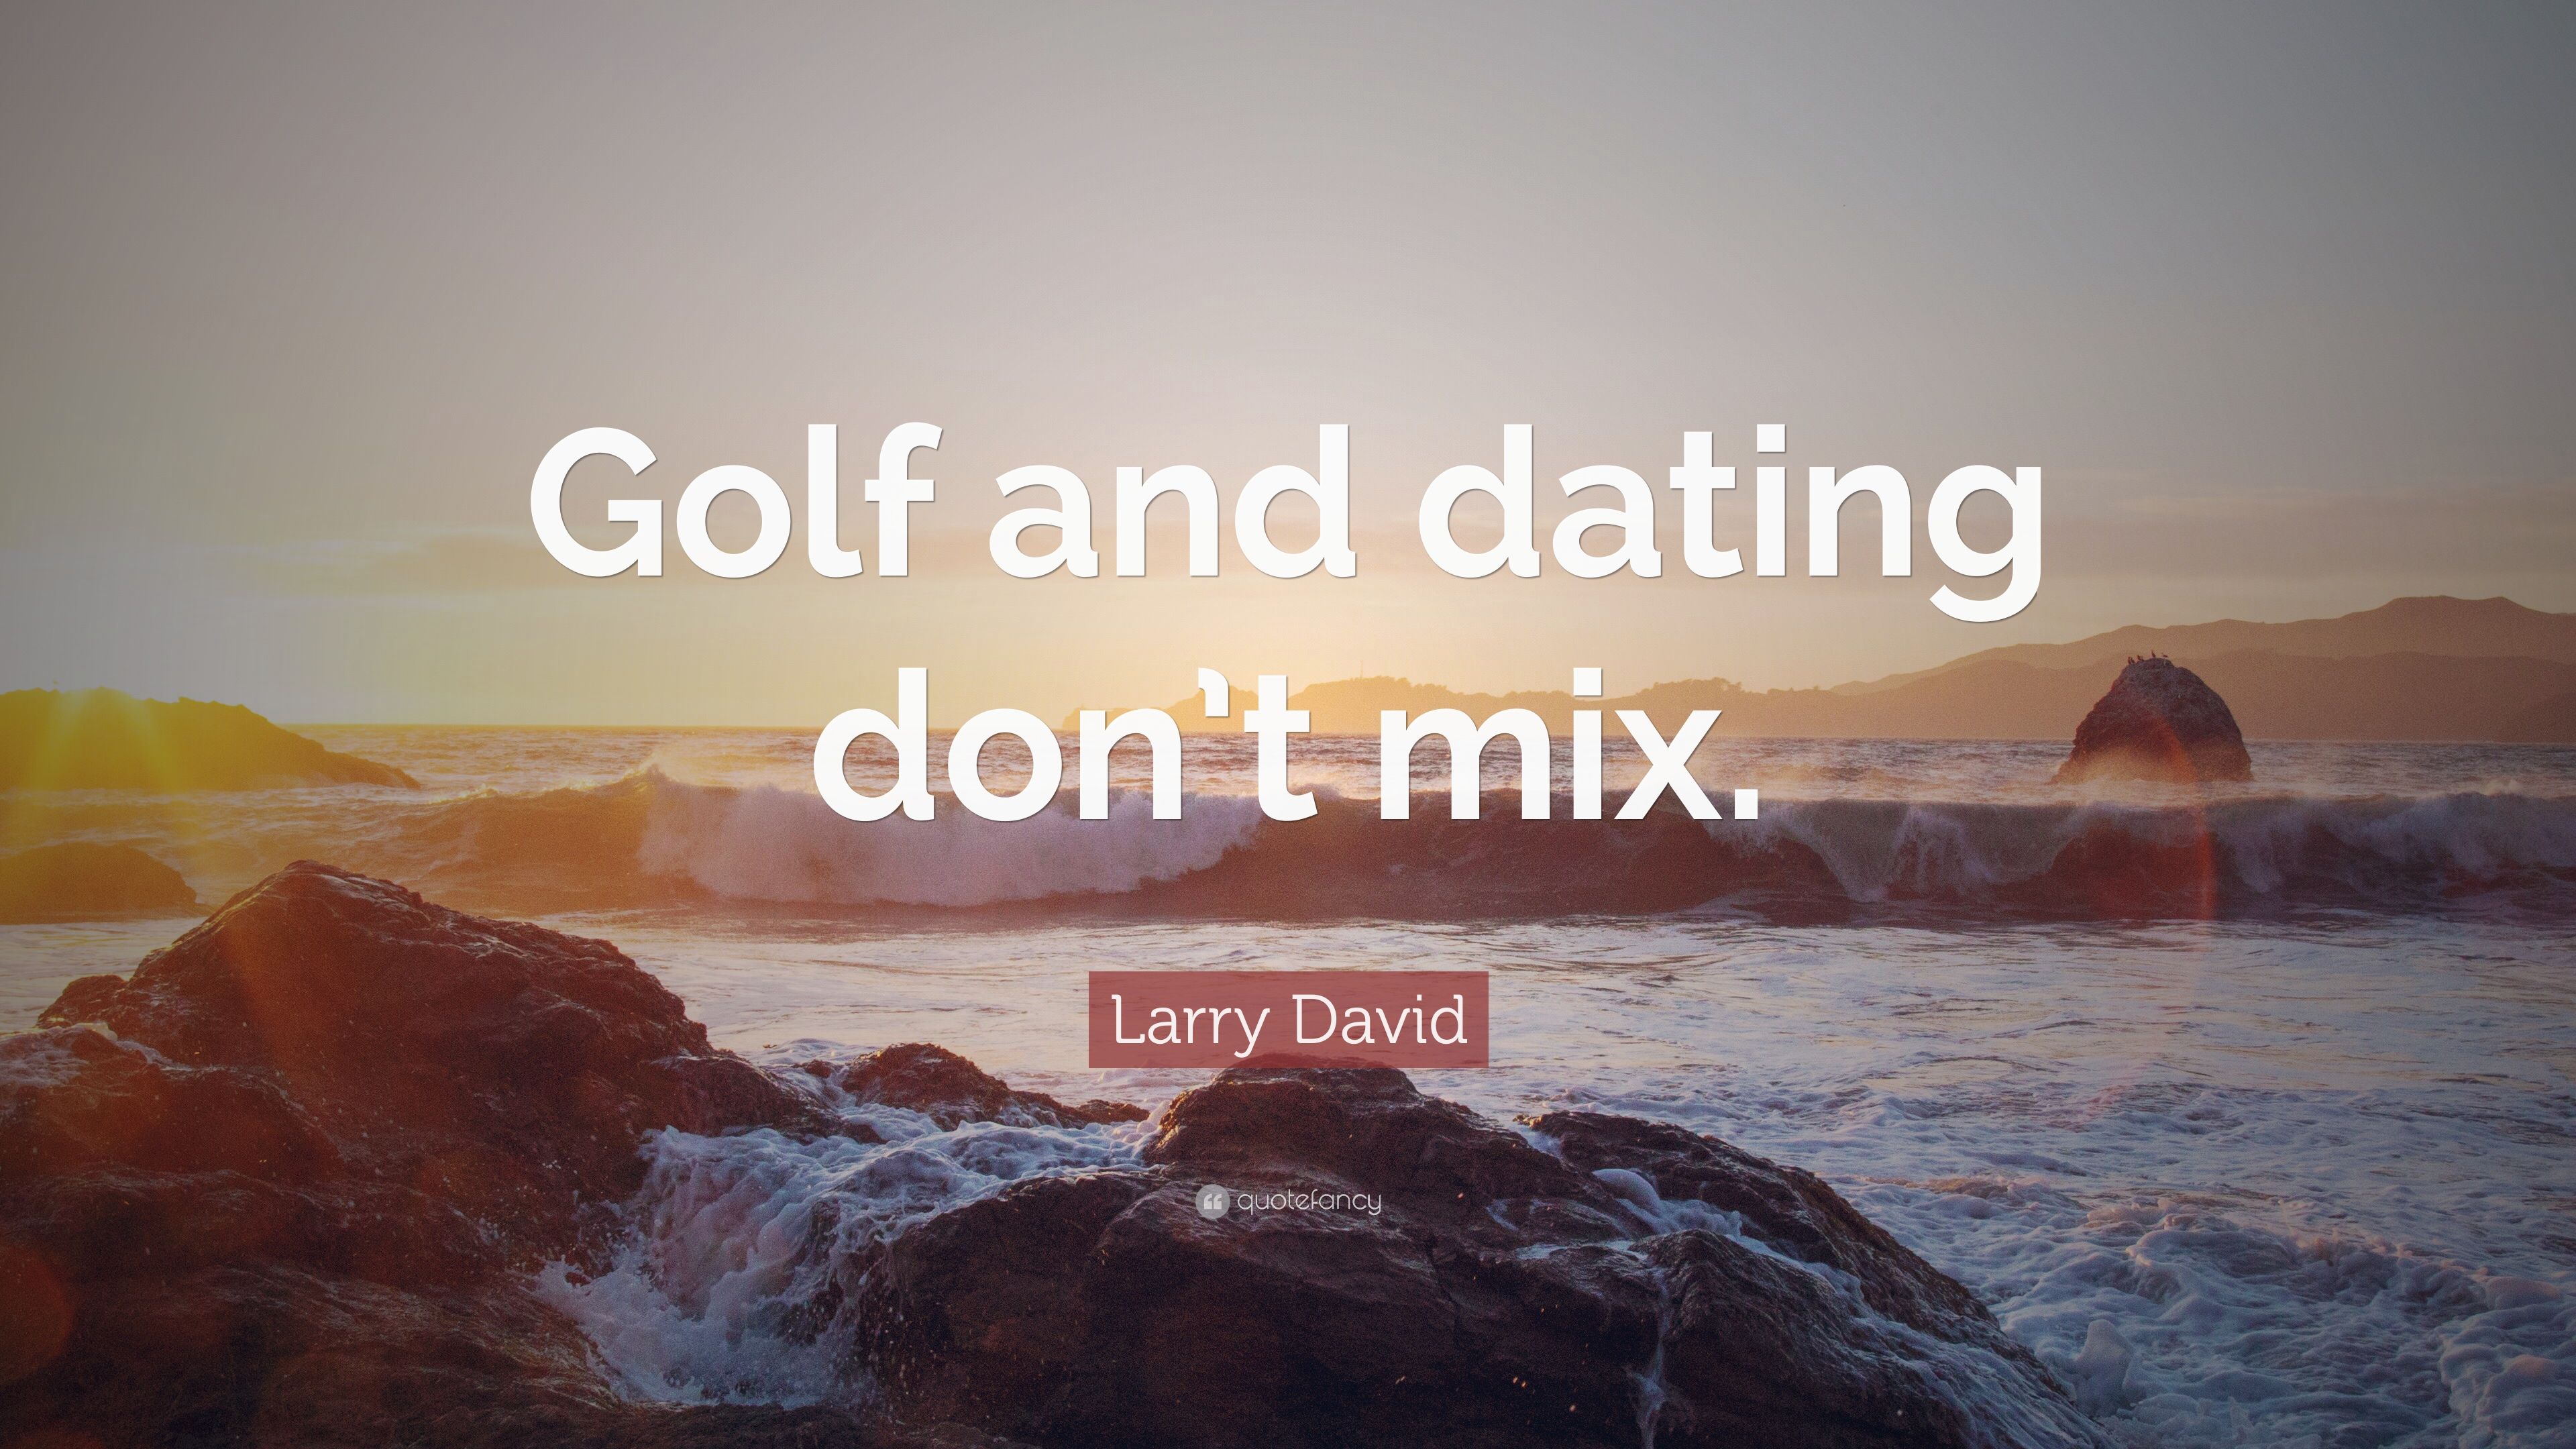 Larry David Quote: “Golf and dating don't mix.” 10 wallpaper